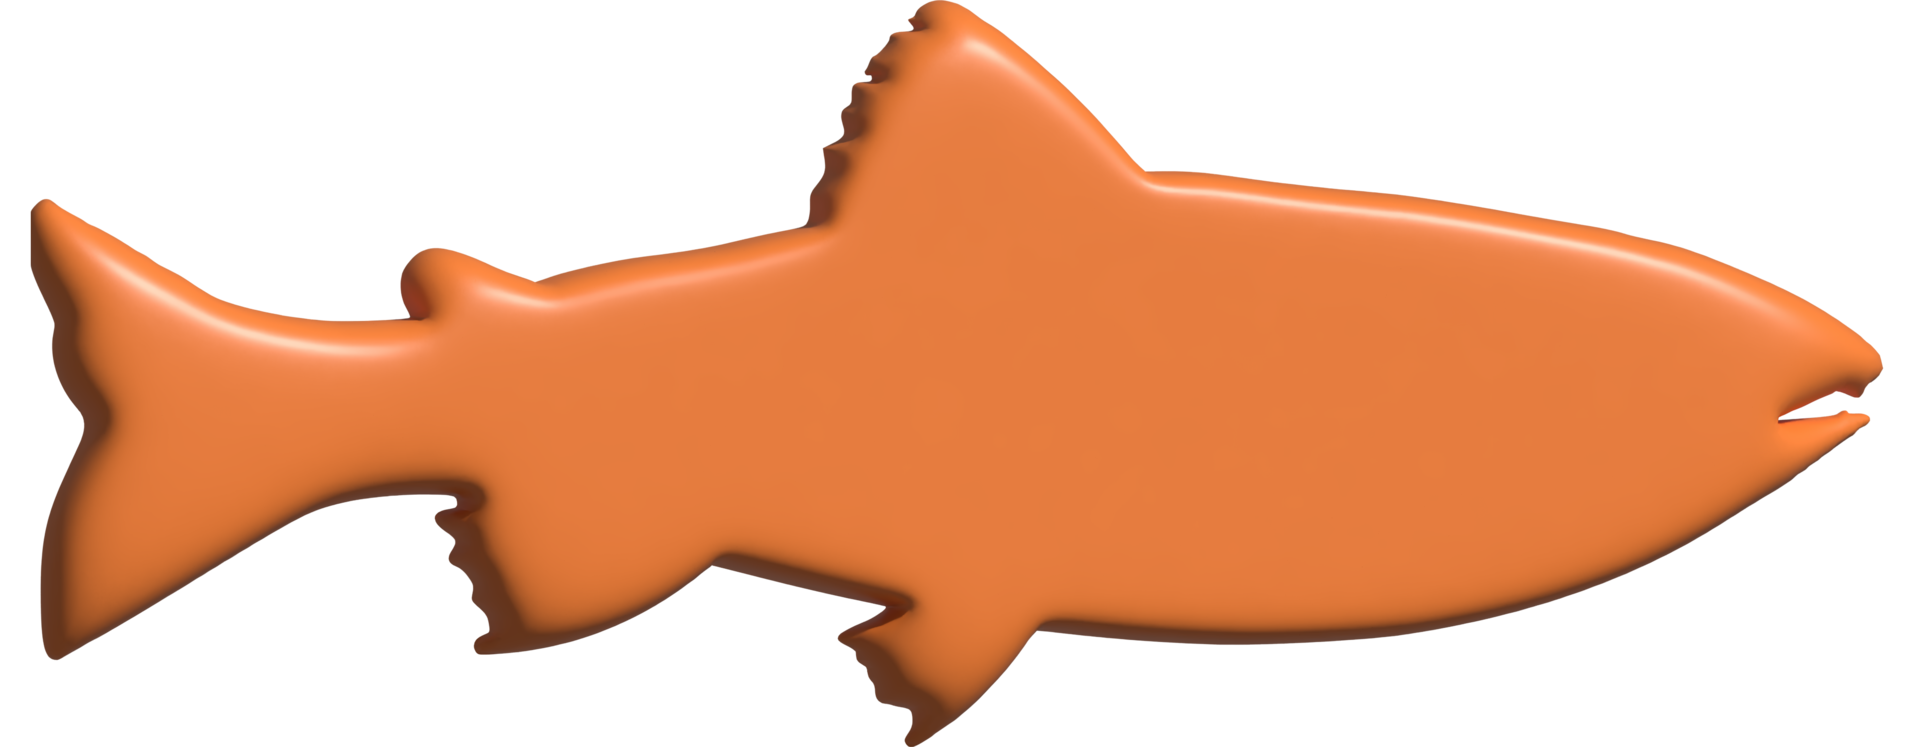 3d illustration of fish icon png